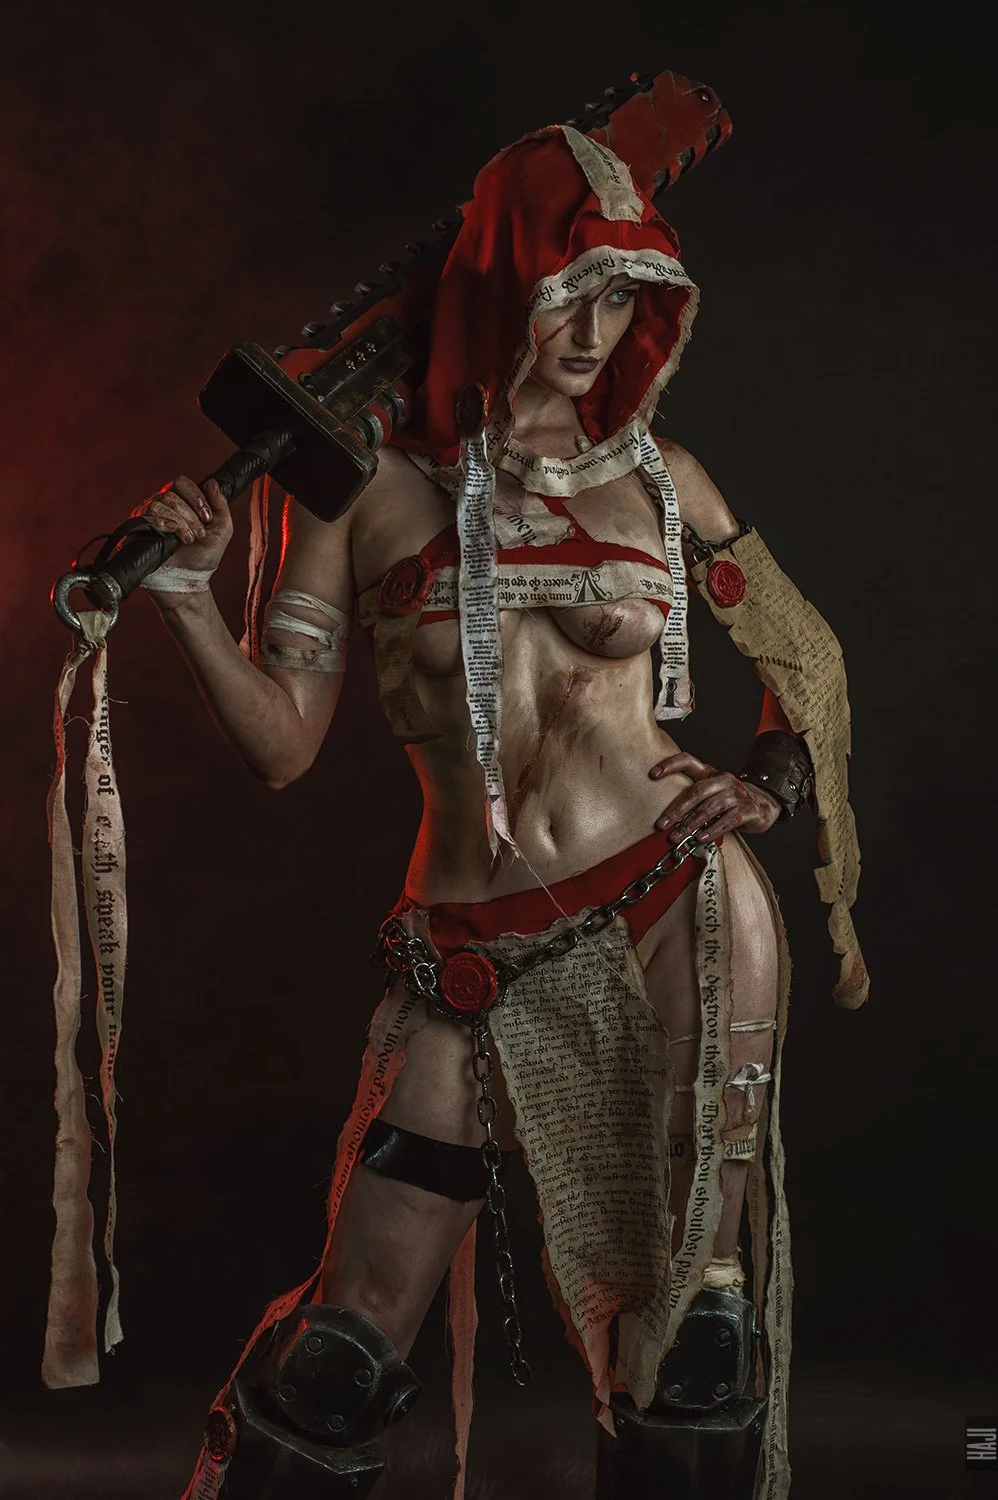 Sister Repentia from Warhammer 40k by Tniwe